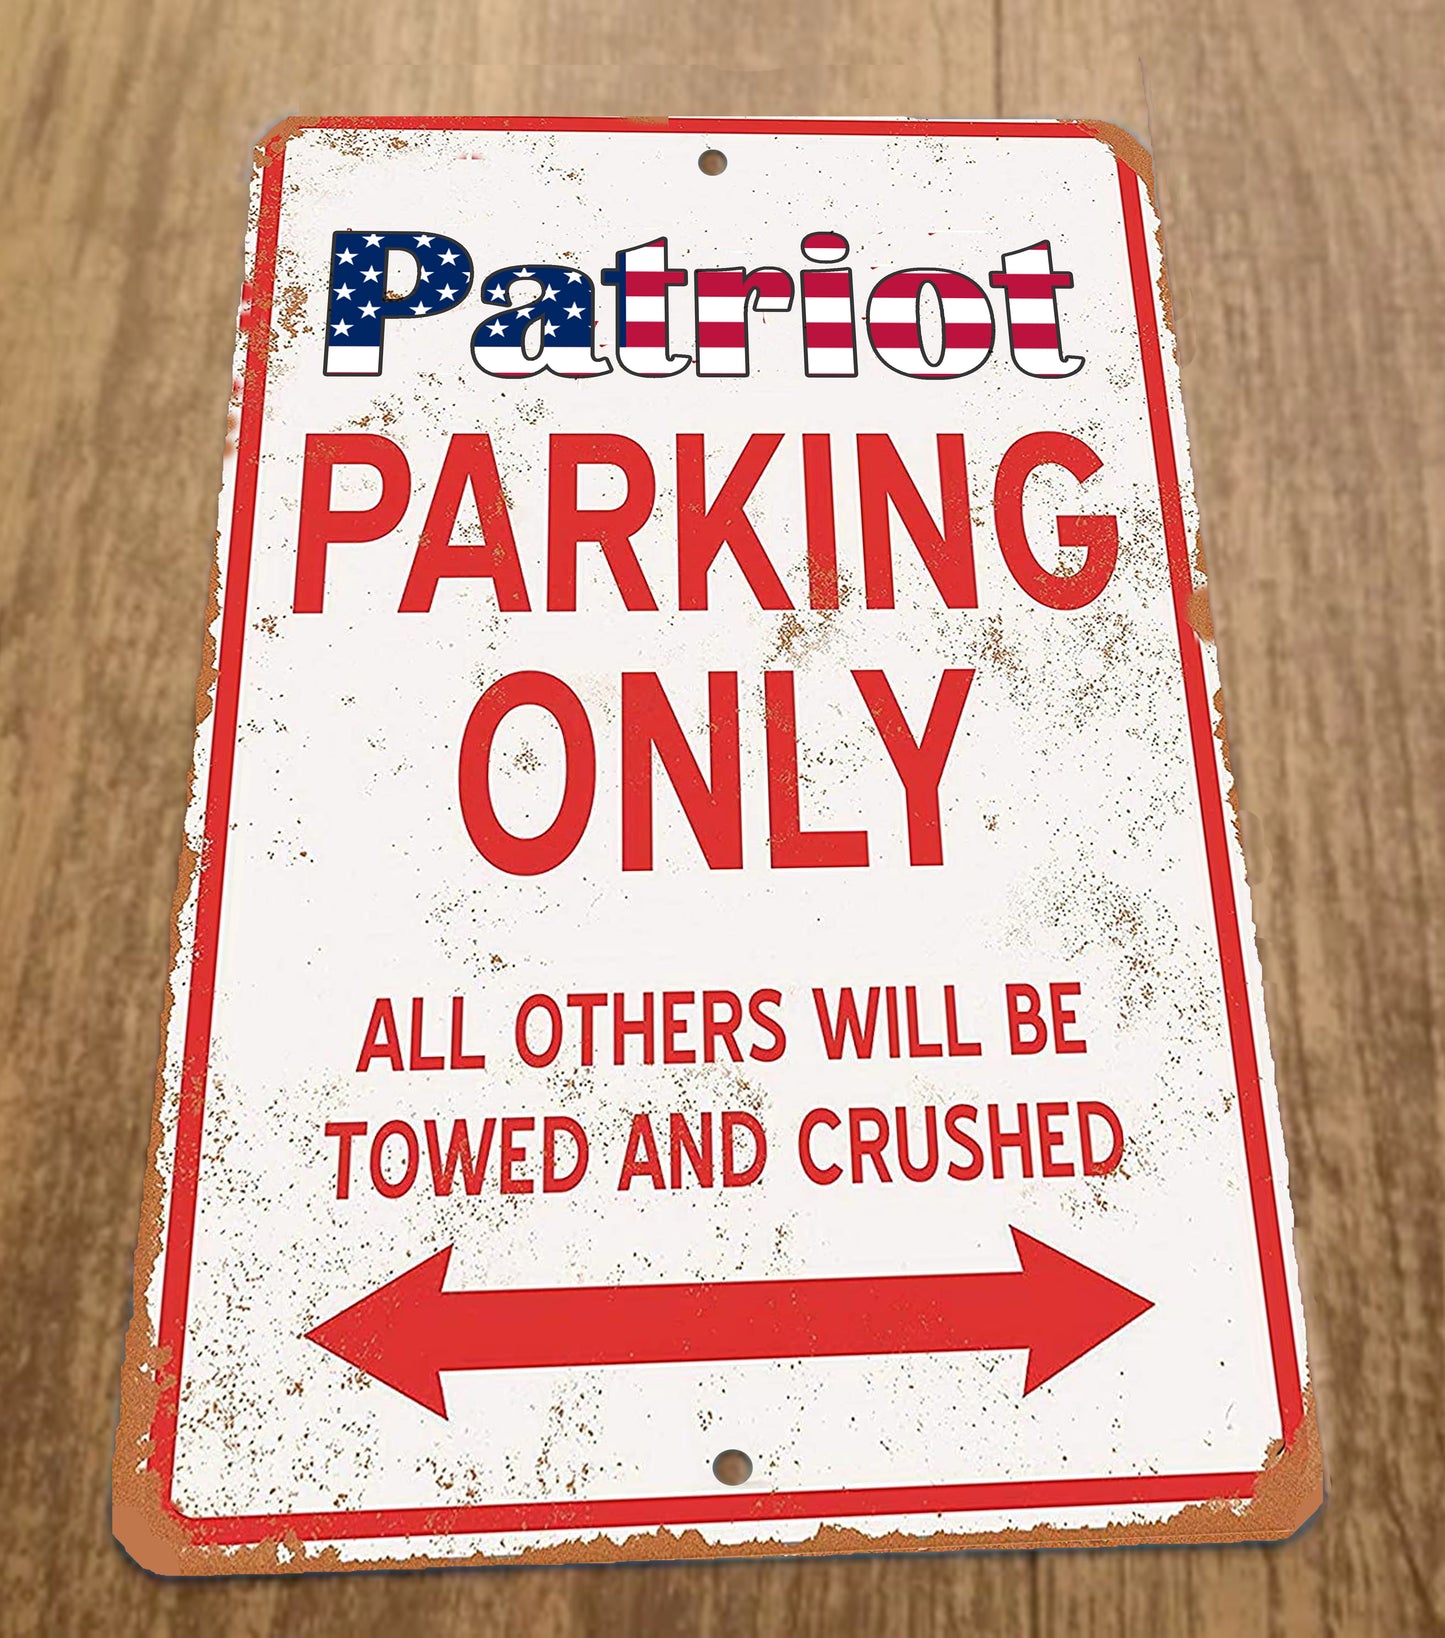 Patriot Parking Only All Others Will be Towed Crushed Military 8x12 Metal Car Sign Garage Poster Armed Forces